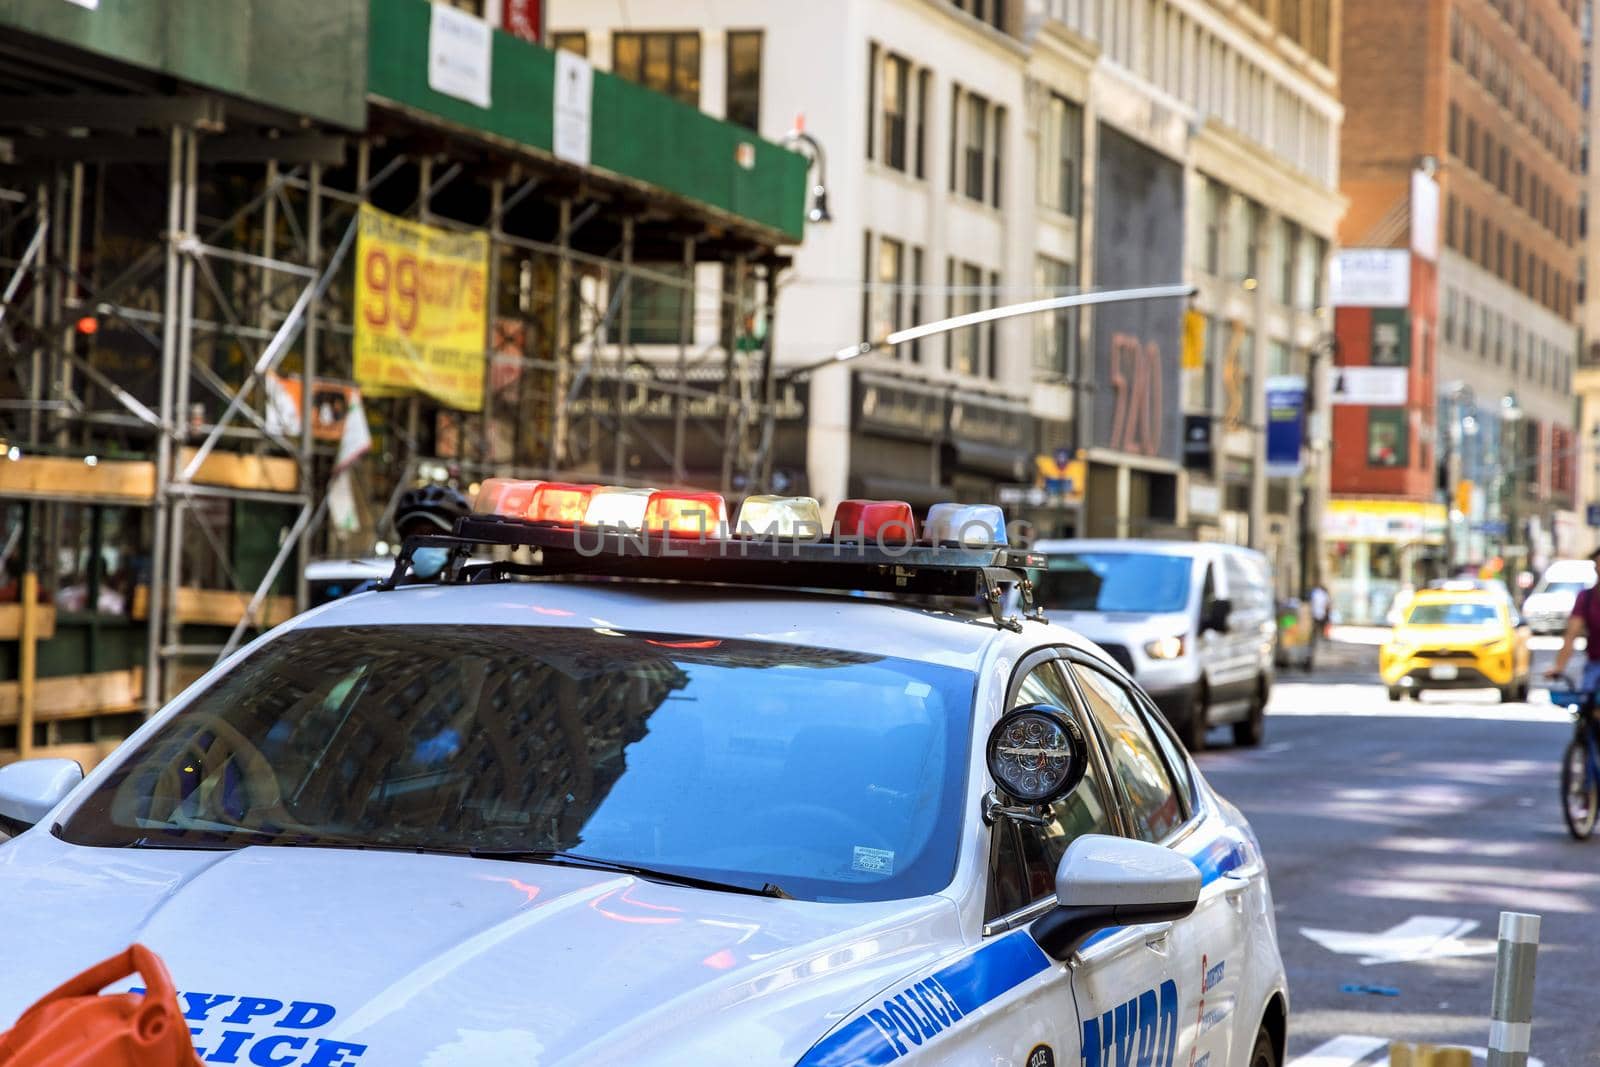 18 June 2021 New York, USA: A police car with light flashes on the roof rush an emergency call in New York City